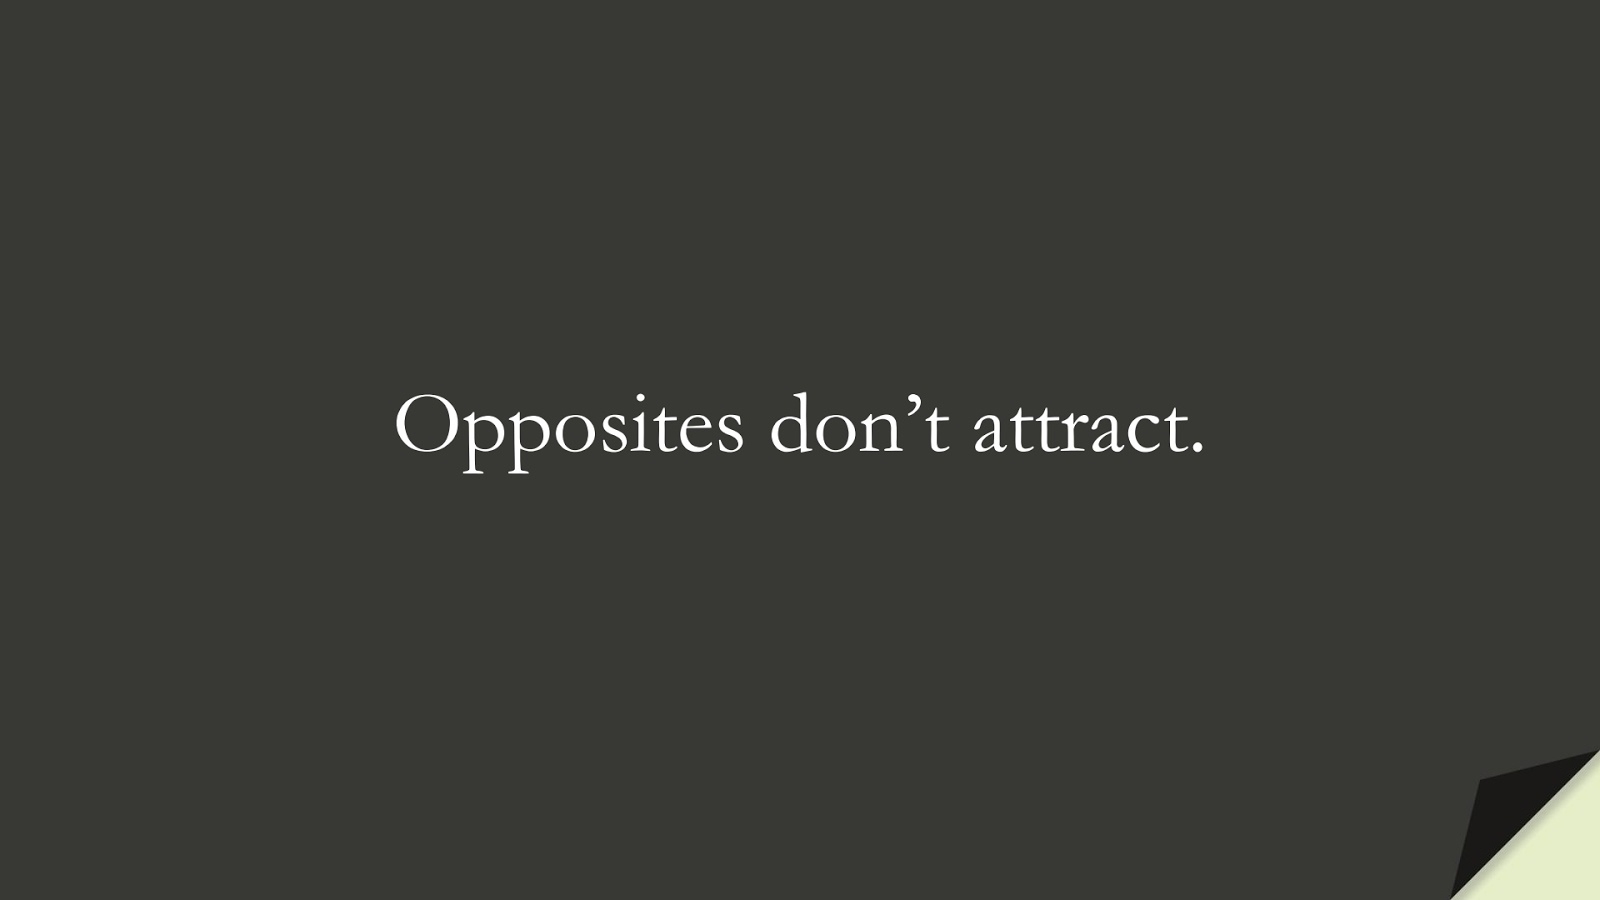 Opposites don’t attract.FALSE